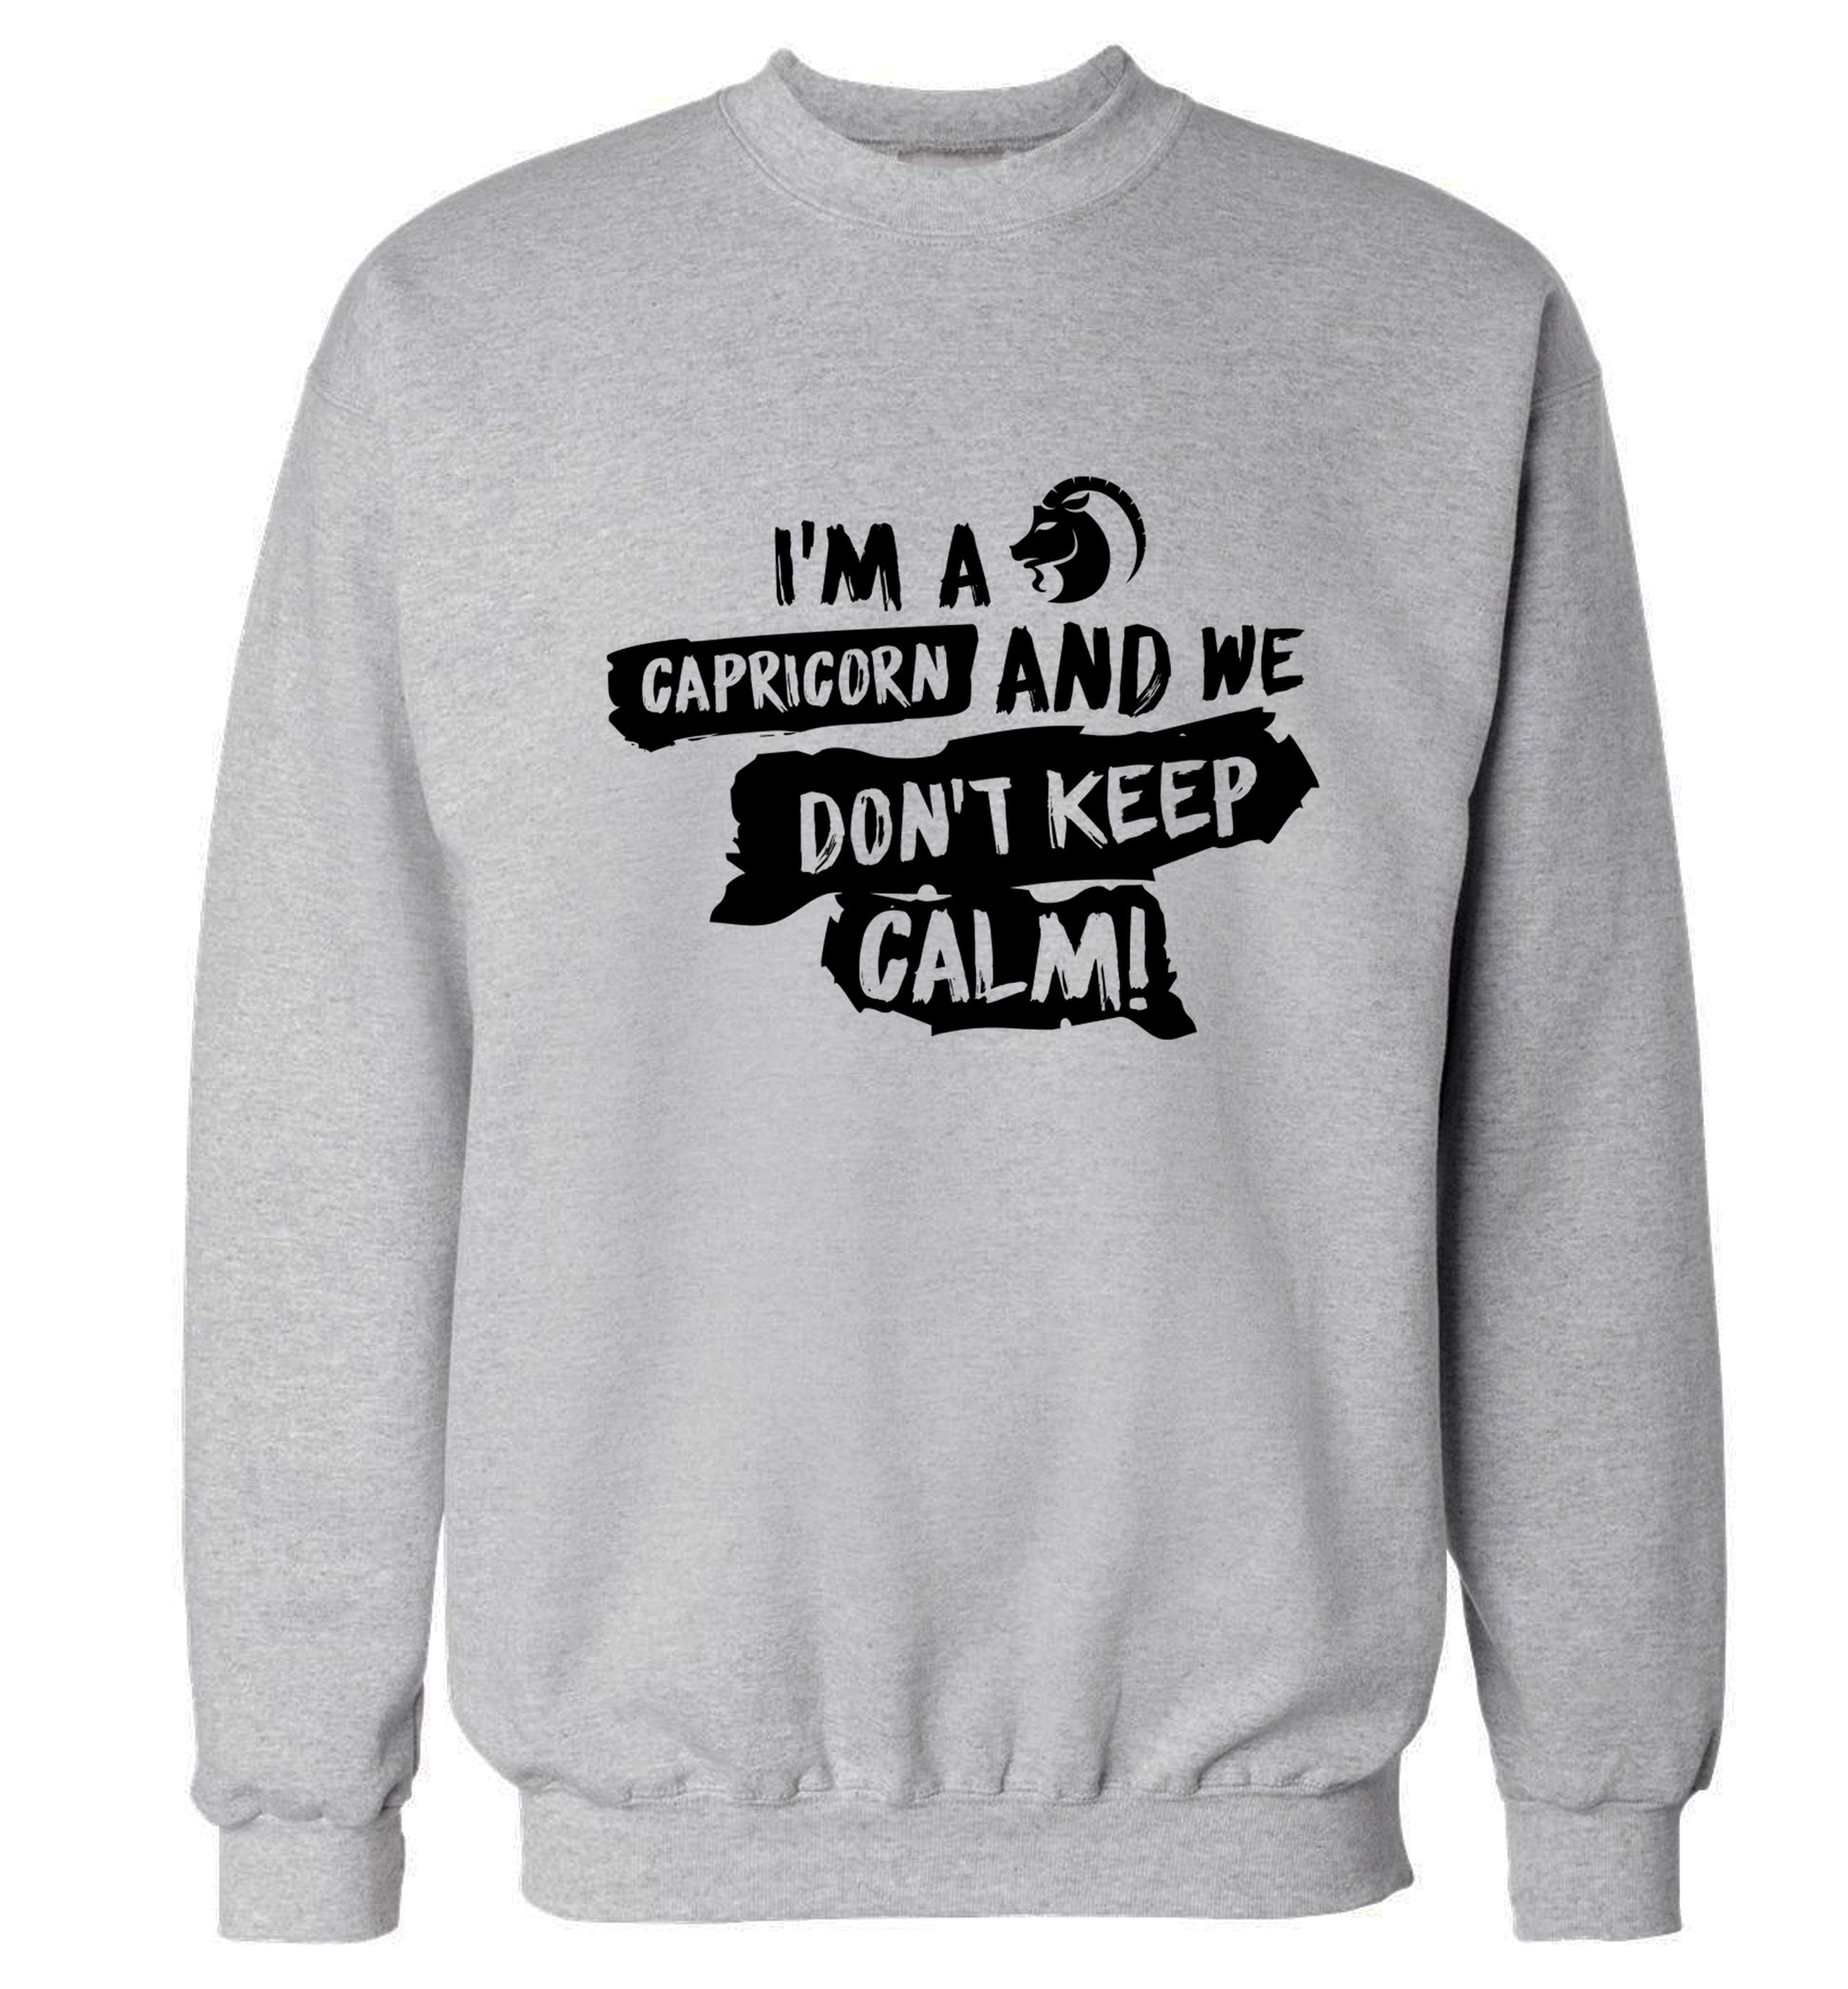 I'm a capricorn and we don't keep calm Adult's unisex grey Sweater 2XL